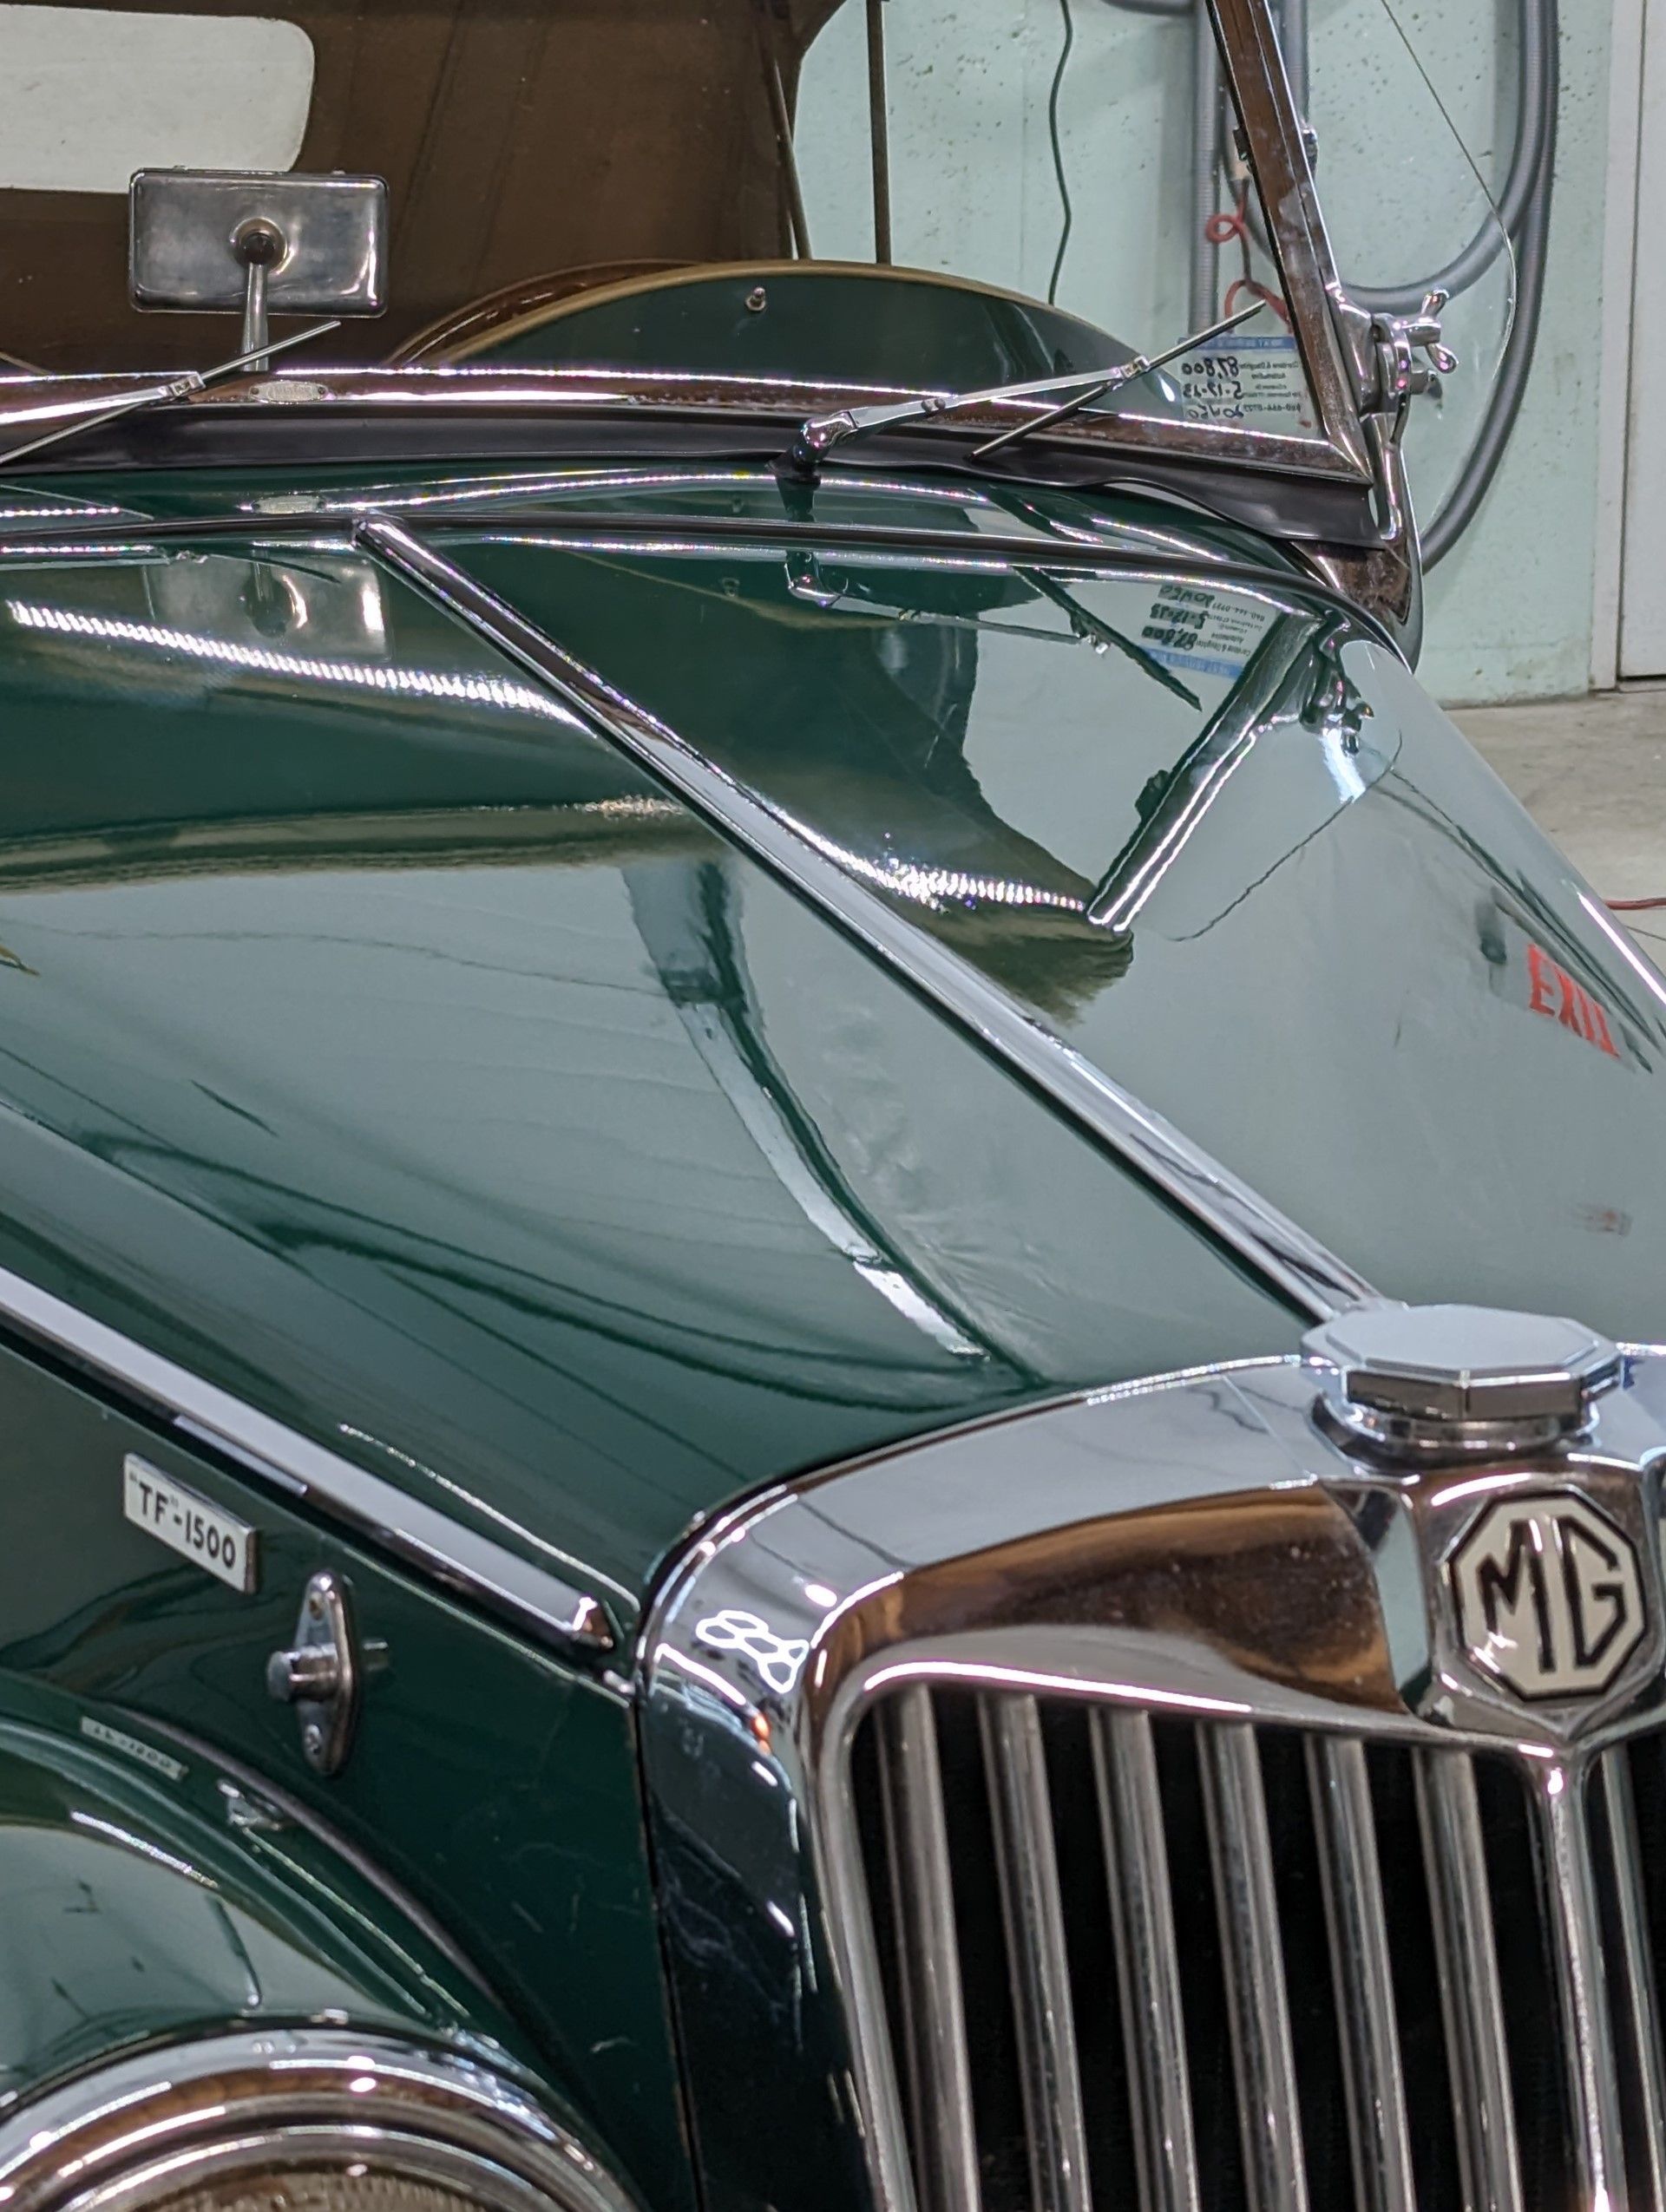 Ceramic Coating - A green mg car is parked in a garage